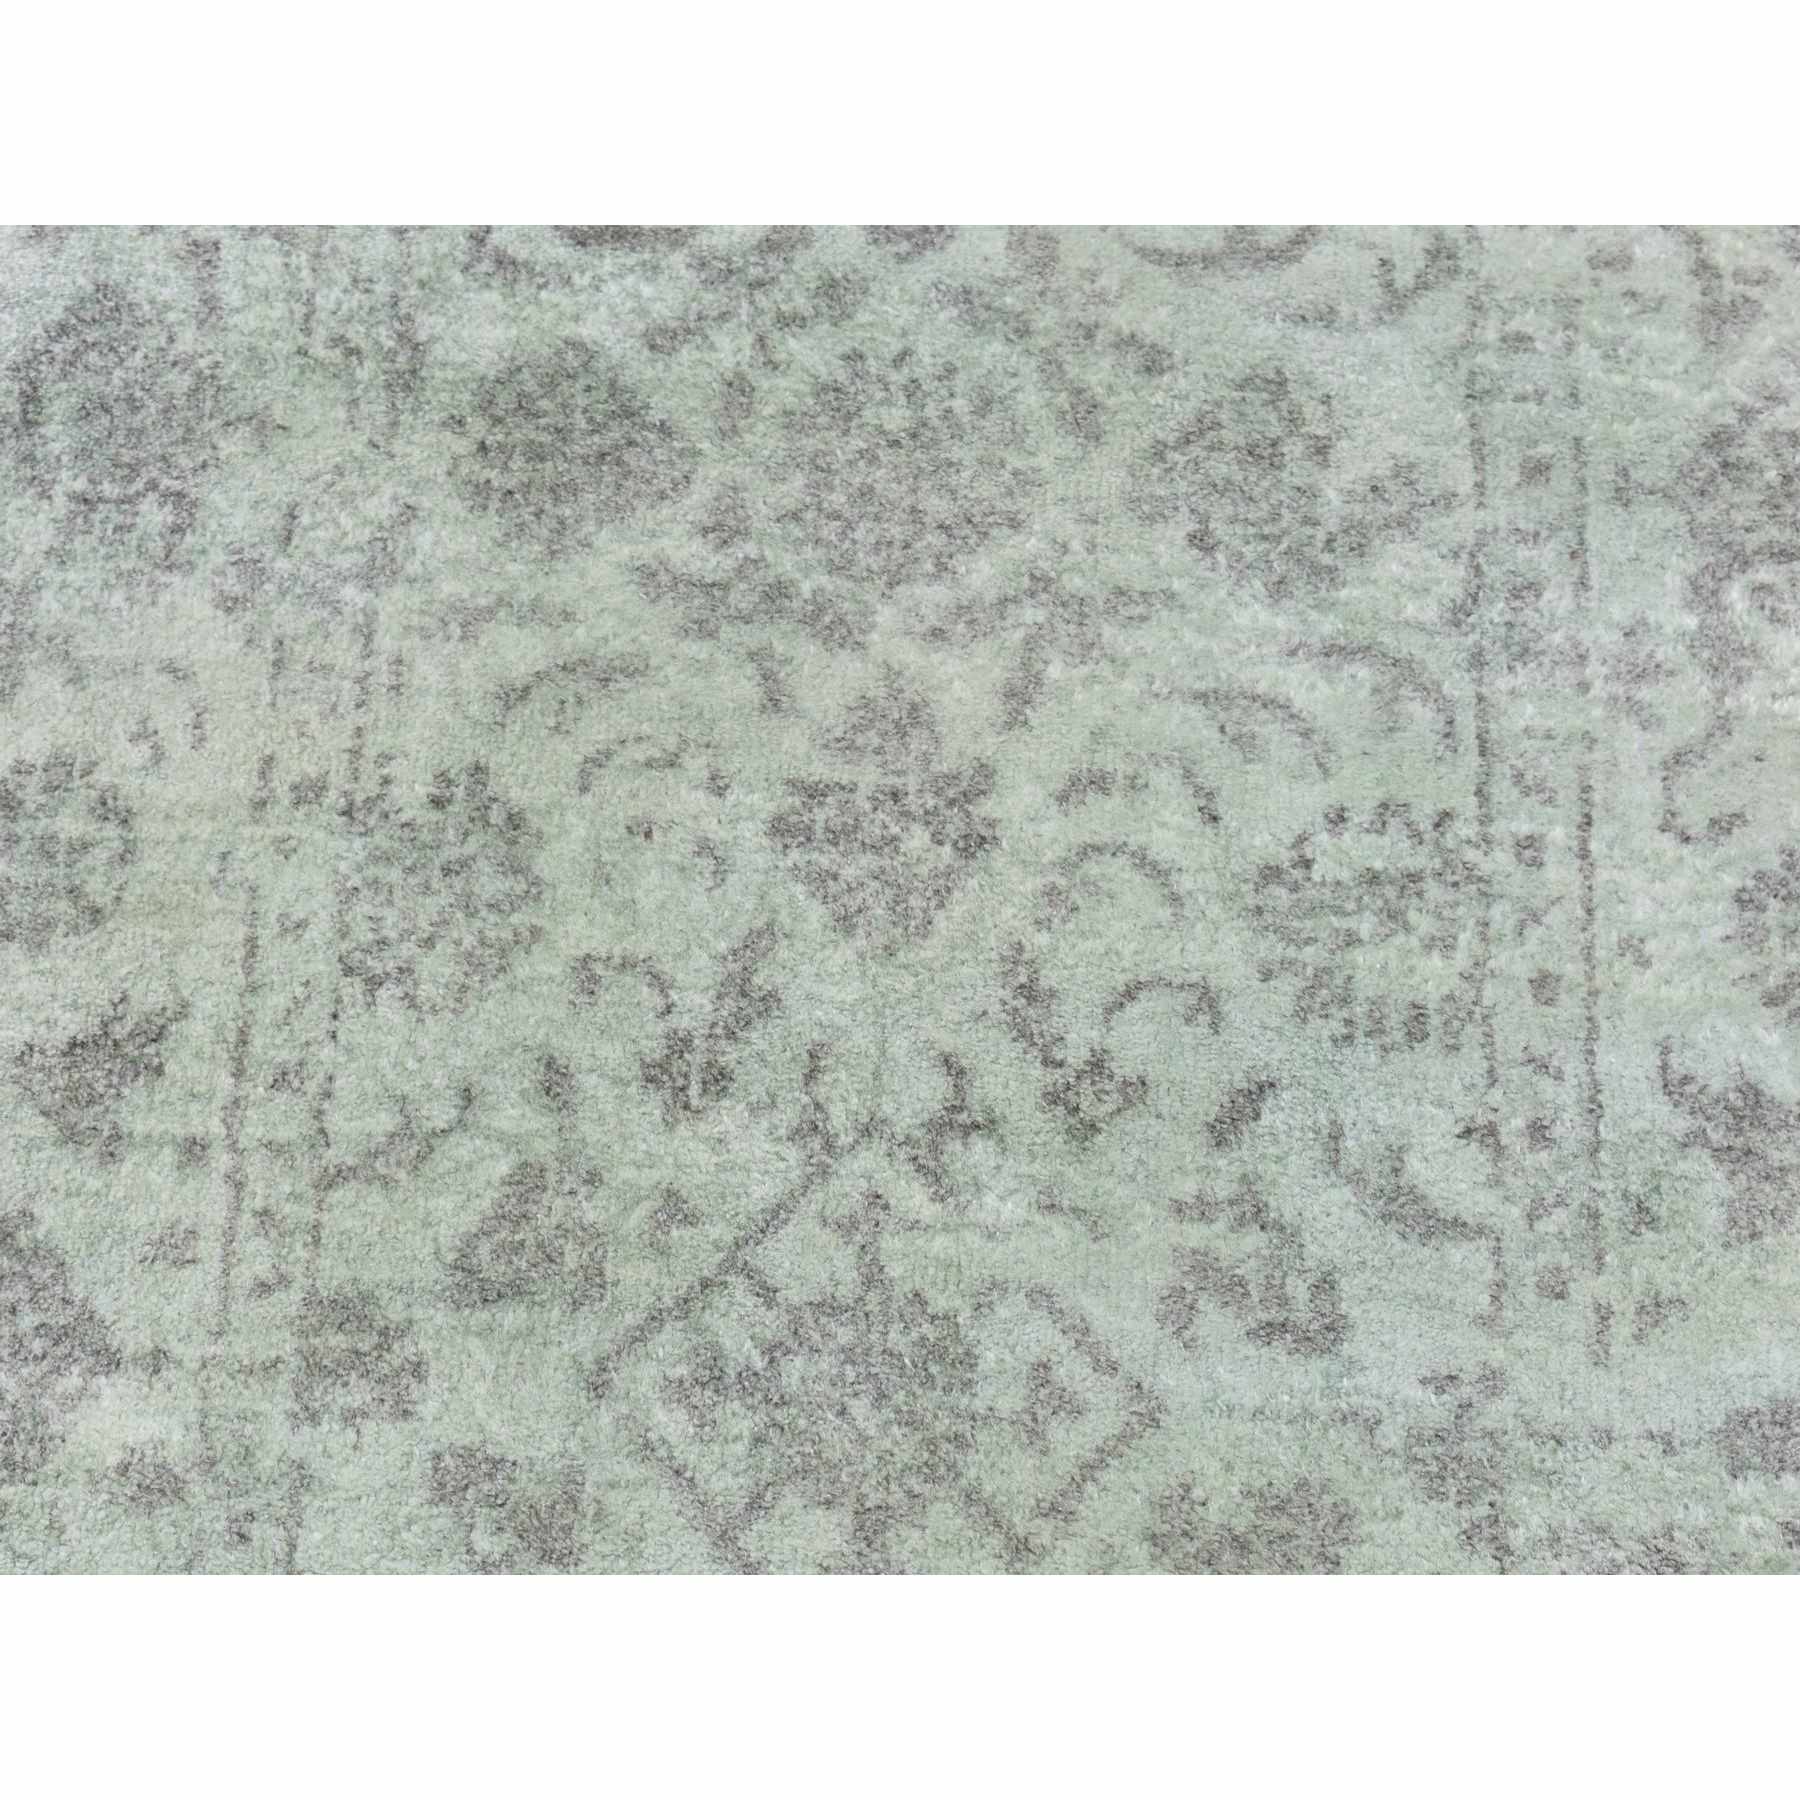 Overdyed-Vintage-Hand-Knotted-Rug-436180